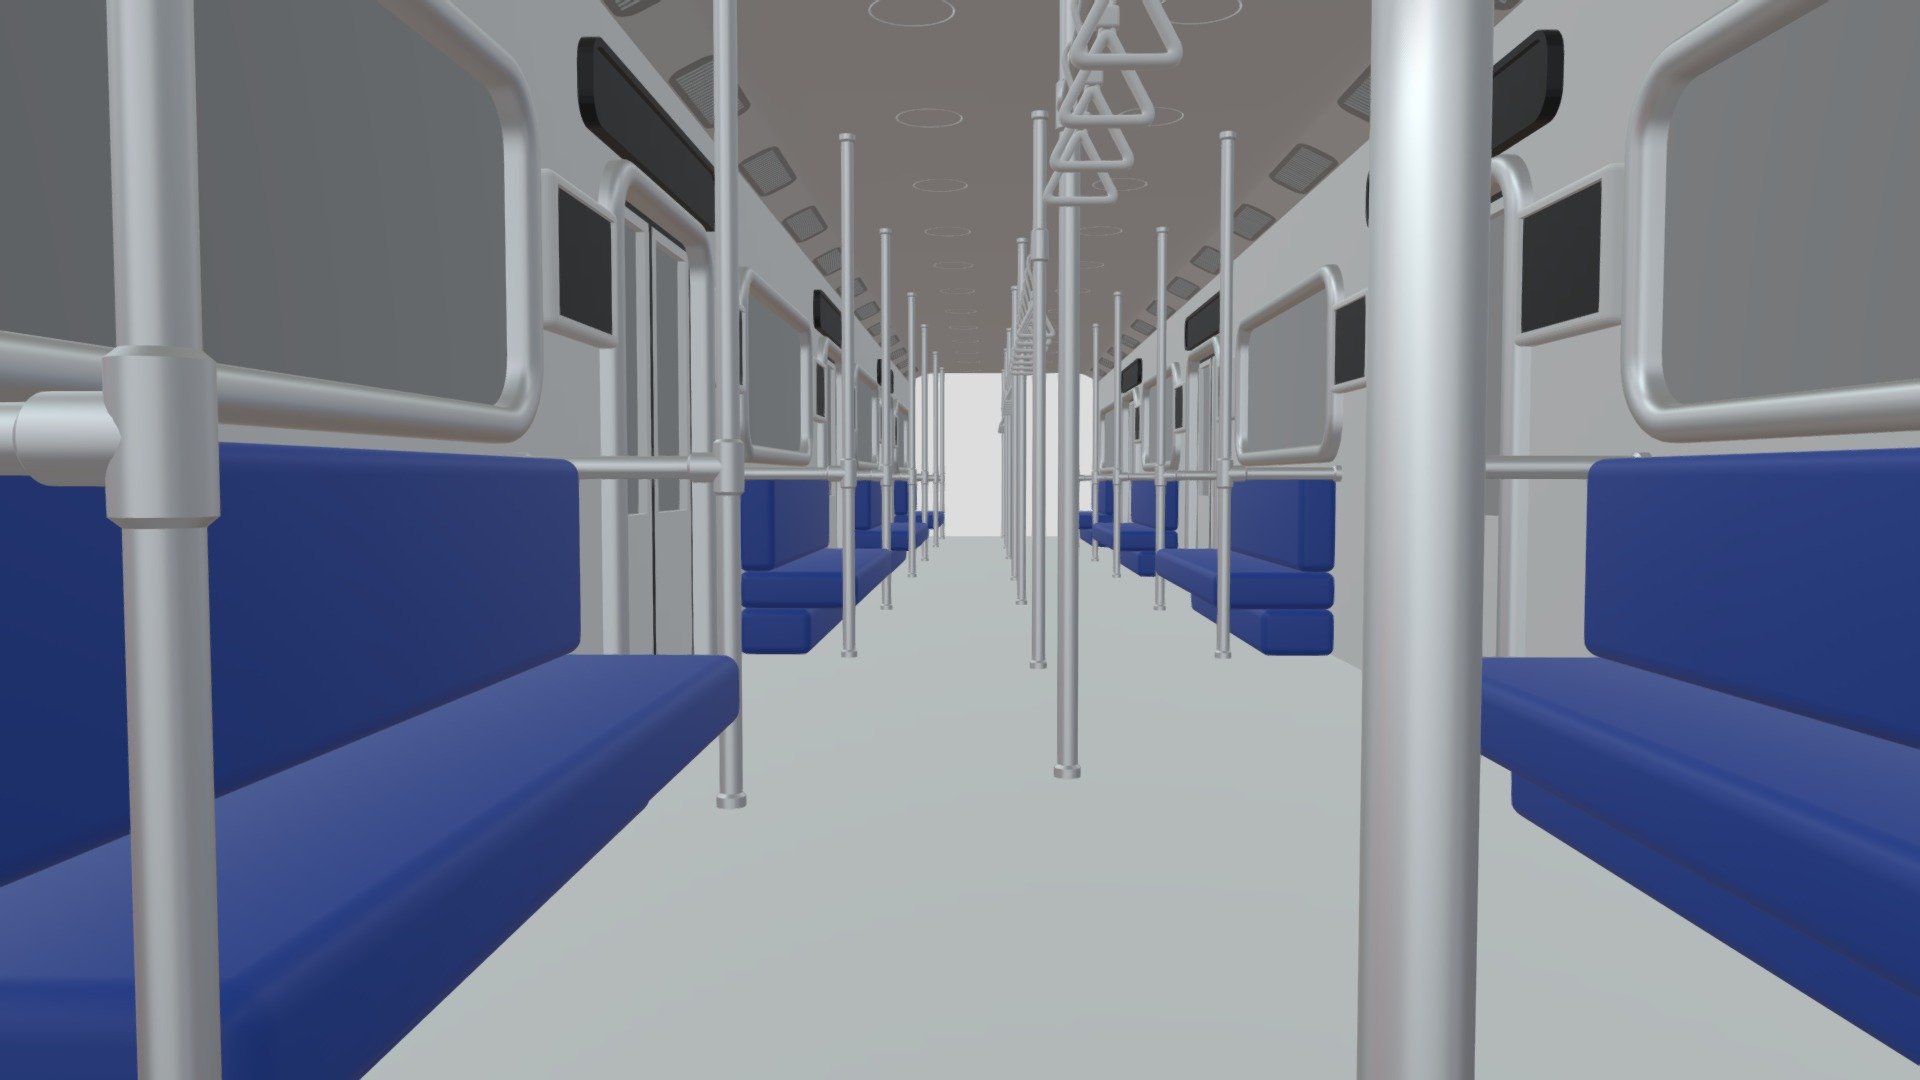 -Cartoon Sci-Fi Subway Interior.

-This file contains 107 objects.




Verts : 124,526 Faces : 115,656.

-Materials and objects have the correct names.

-This product was created in Blender 2.8

-Formats: blend, fbx, obj, c4d, dae, abc, stl, glb,unitypackage.

-We hope you enjoy this model.

-Thank you 3d model